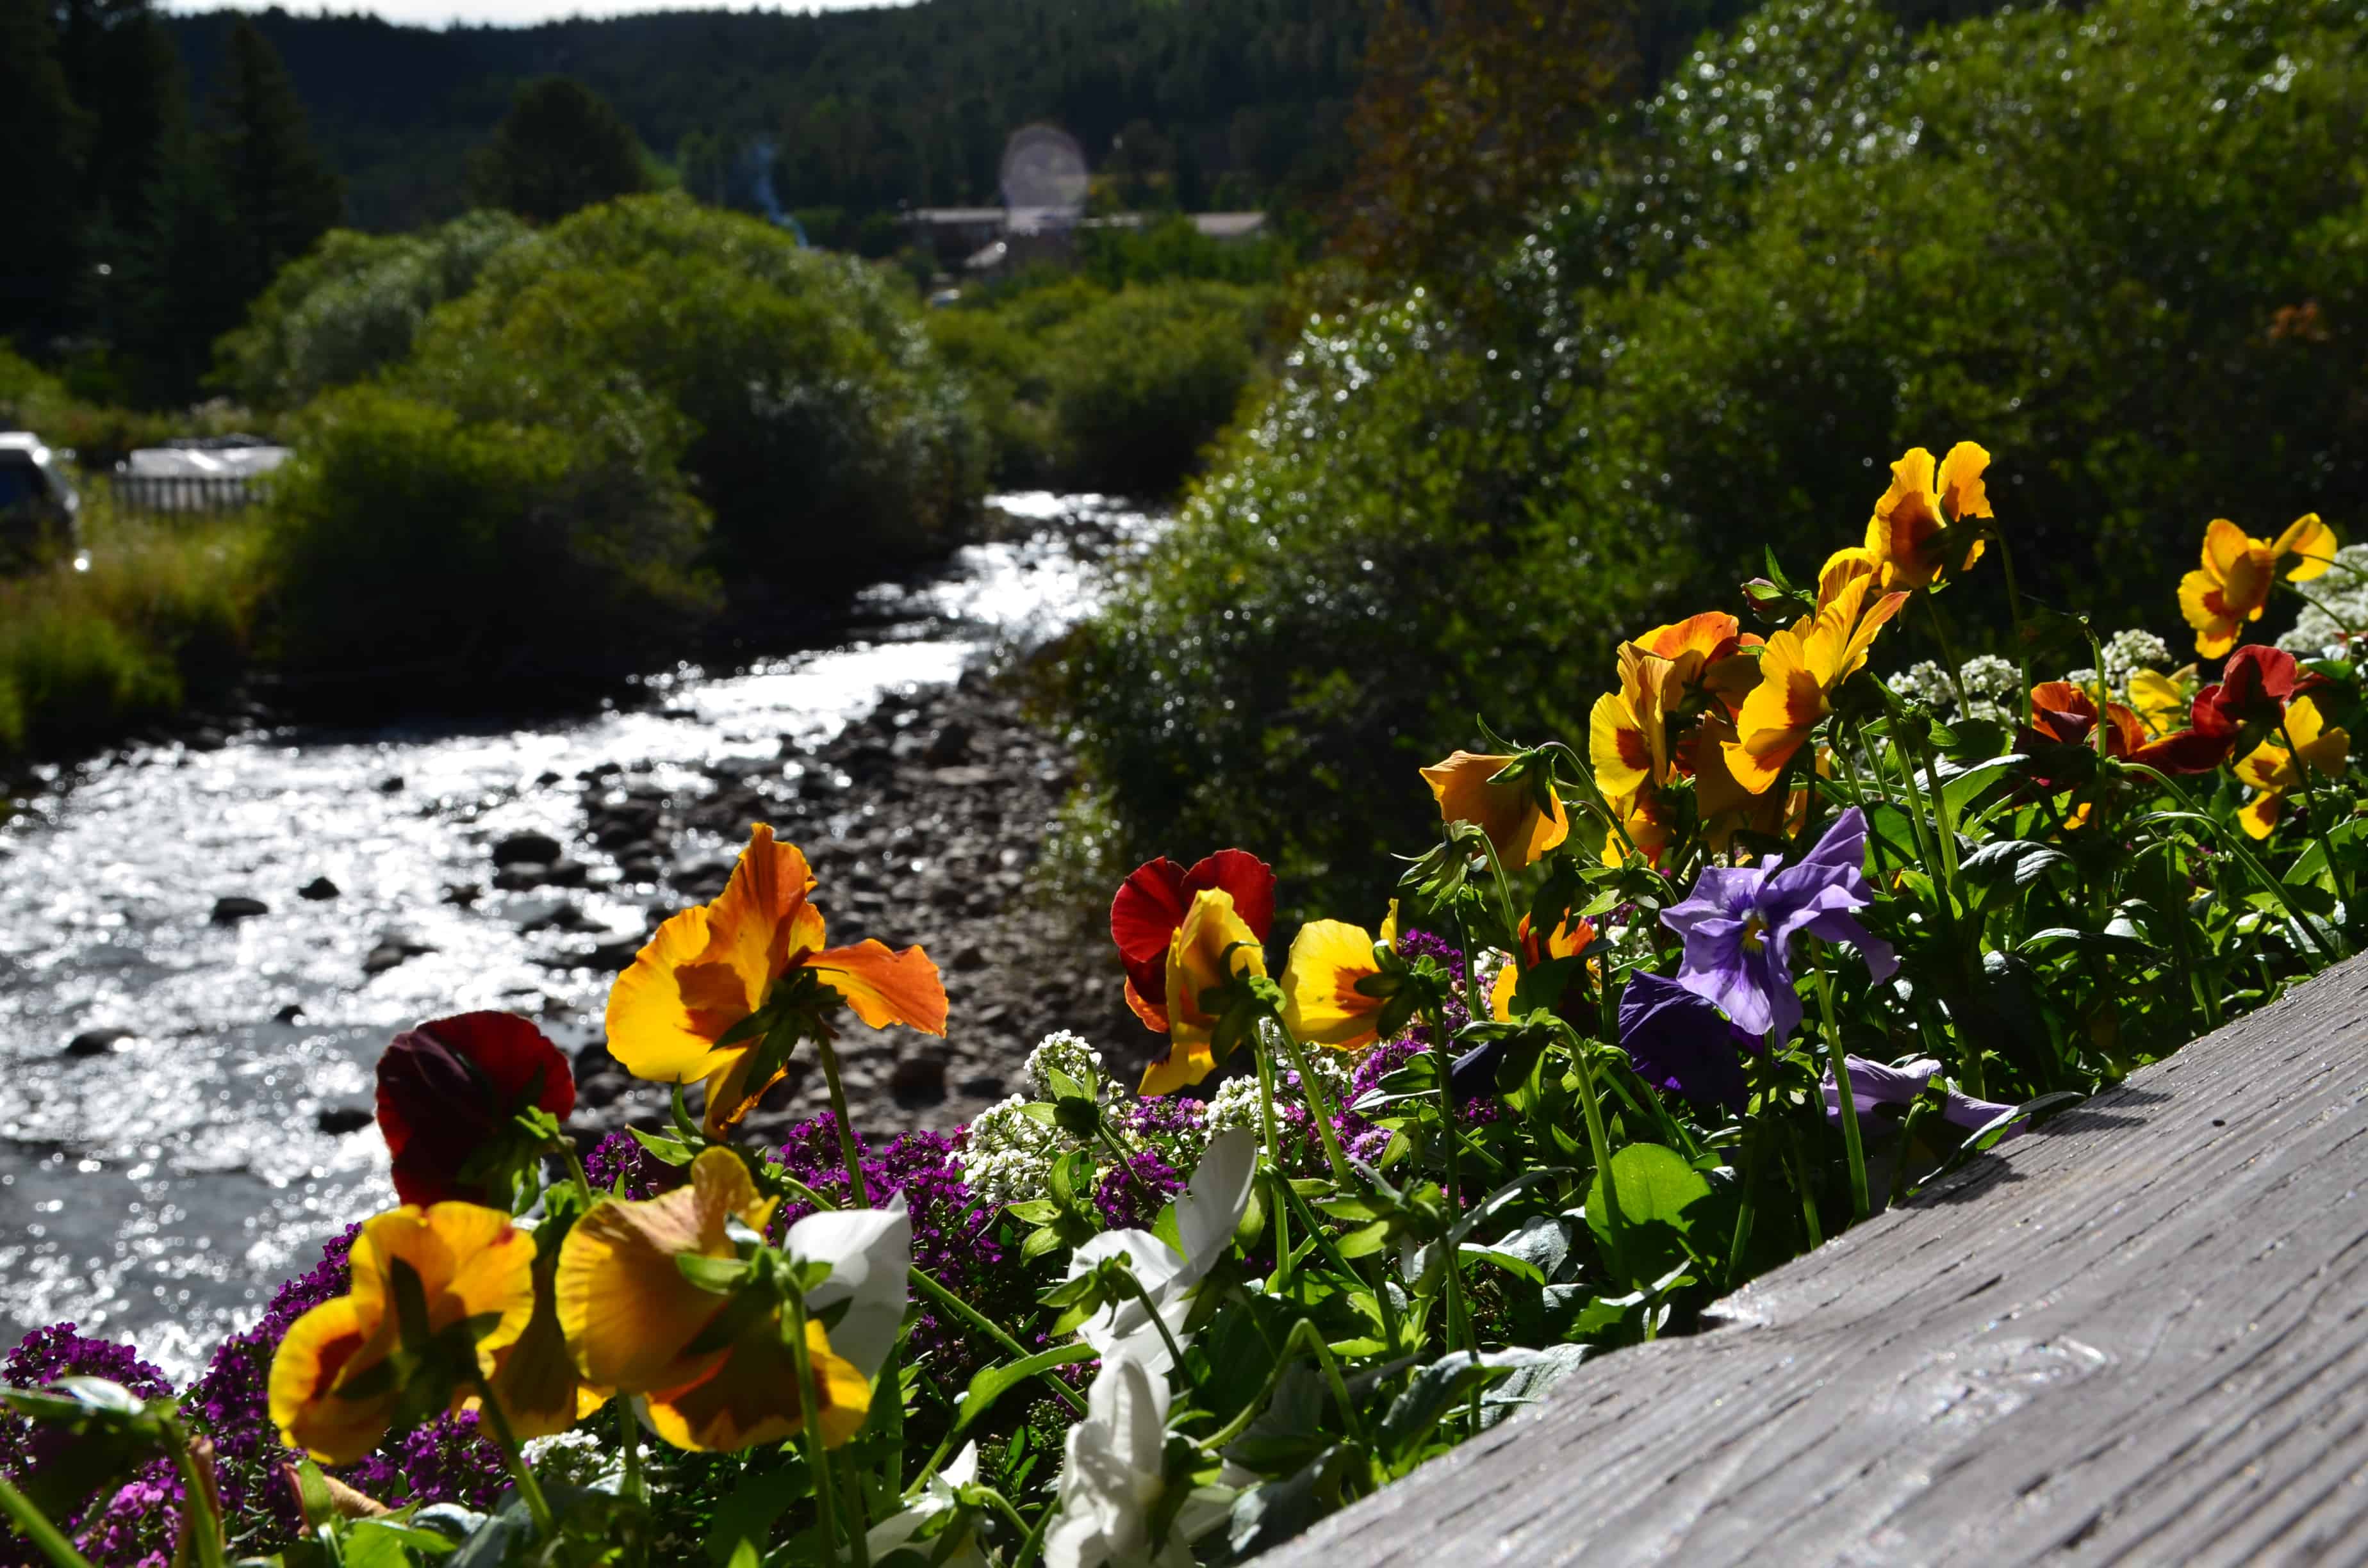 Looking over the covered bridge in Nederland, Colorado